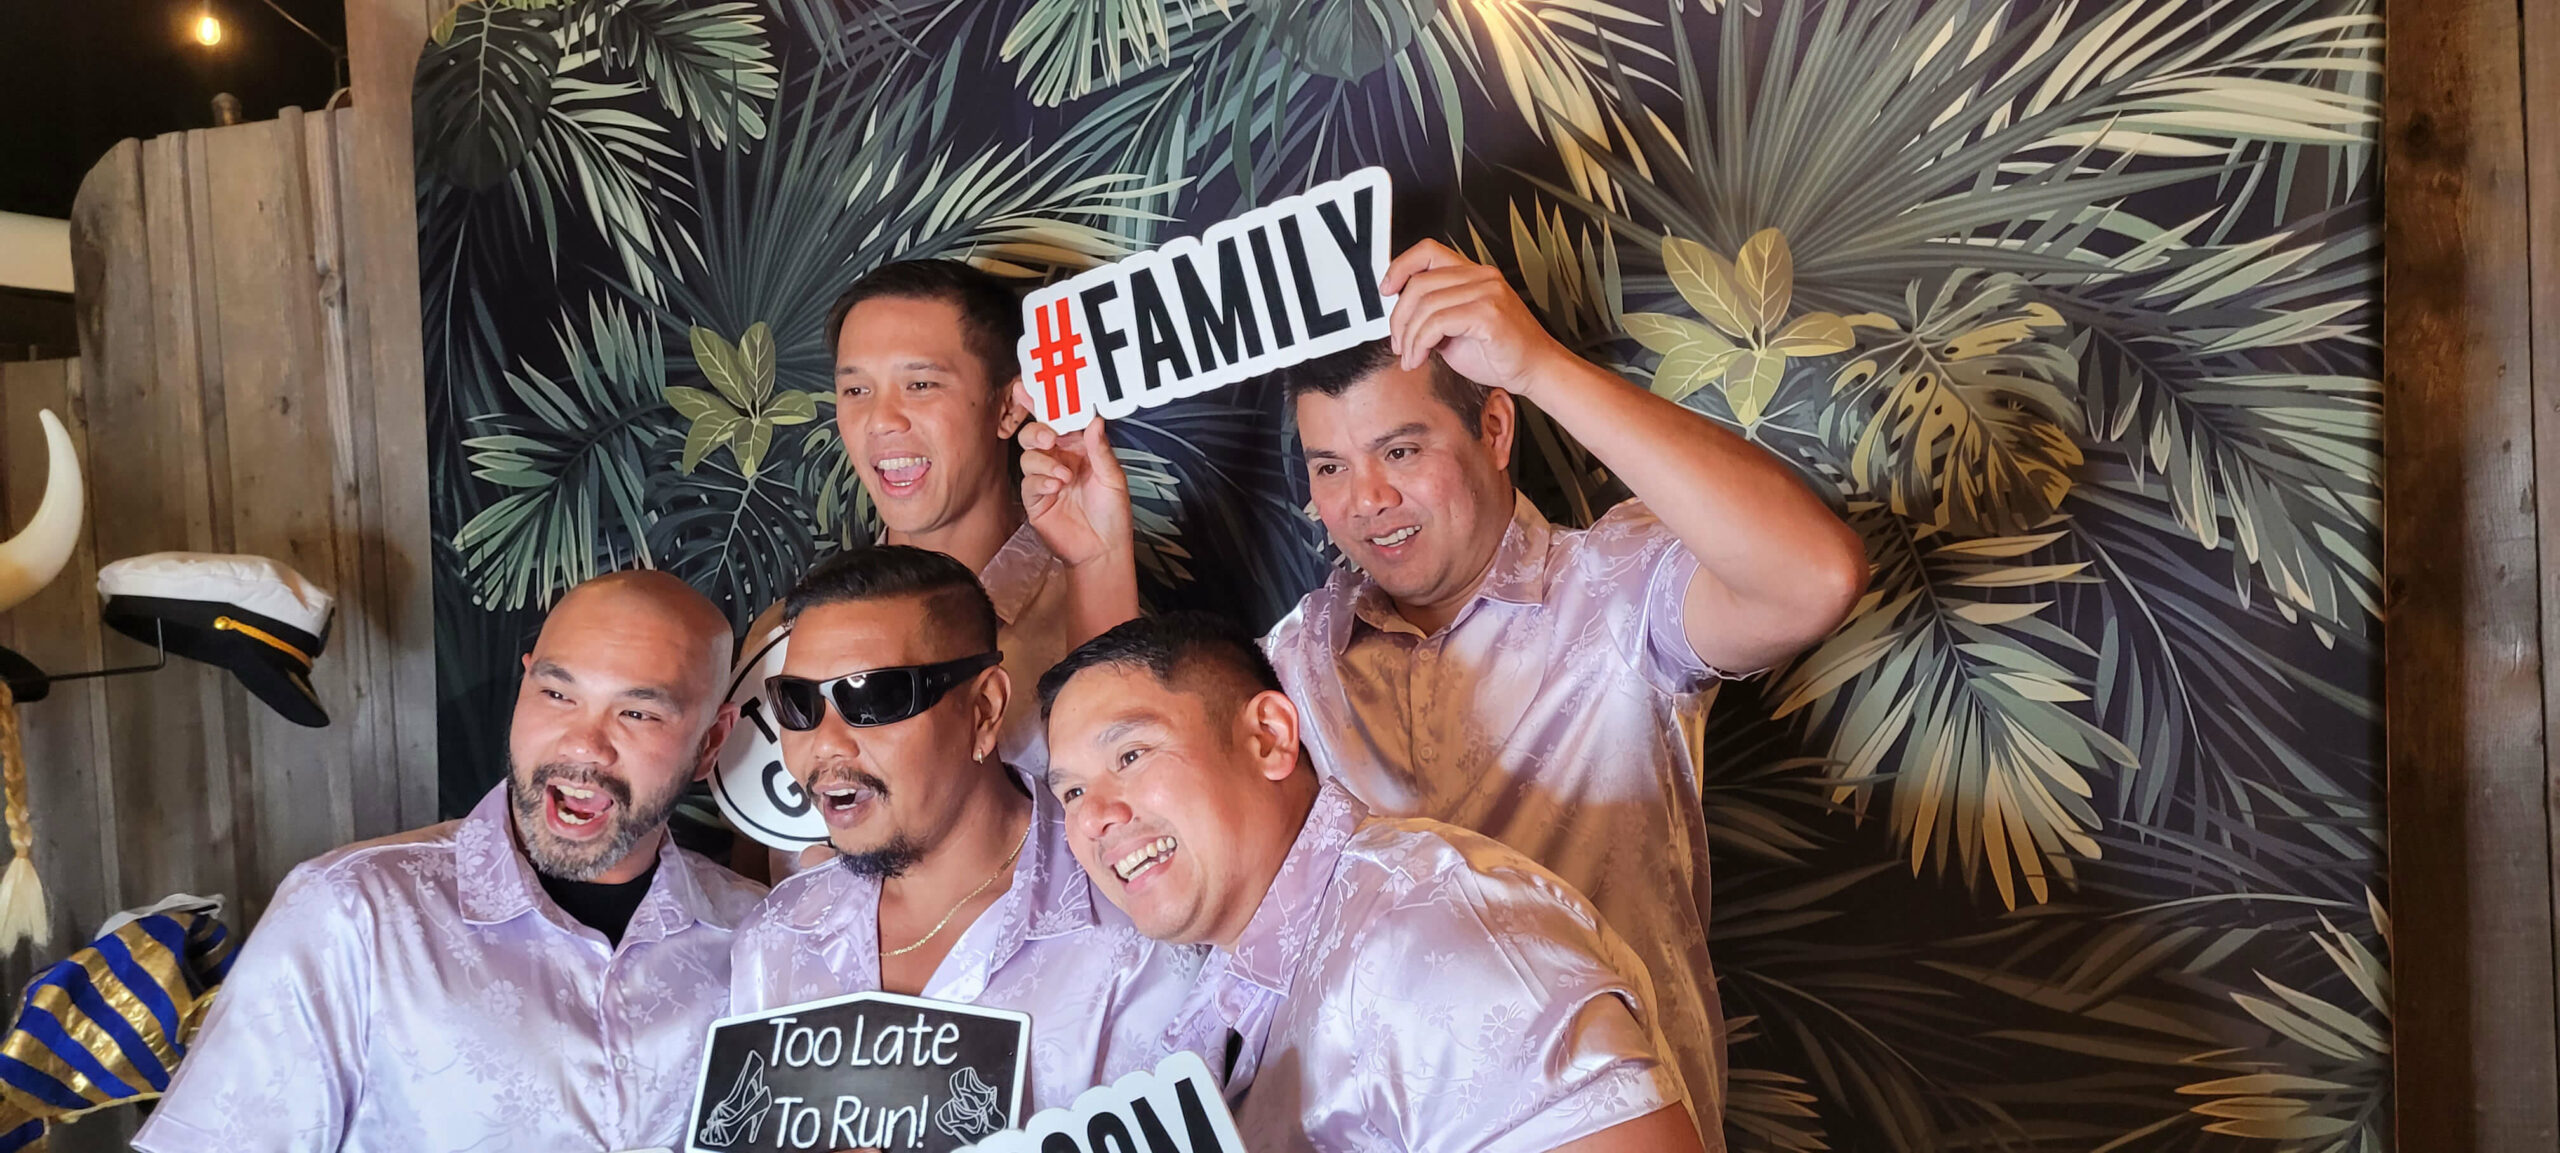 Caught In The Act photo booth rental for family